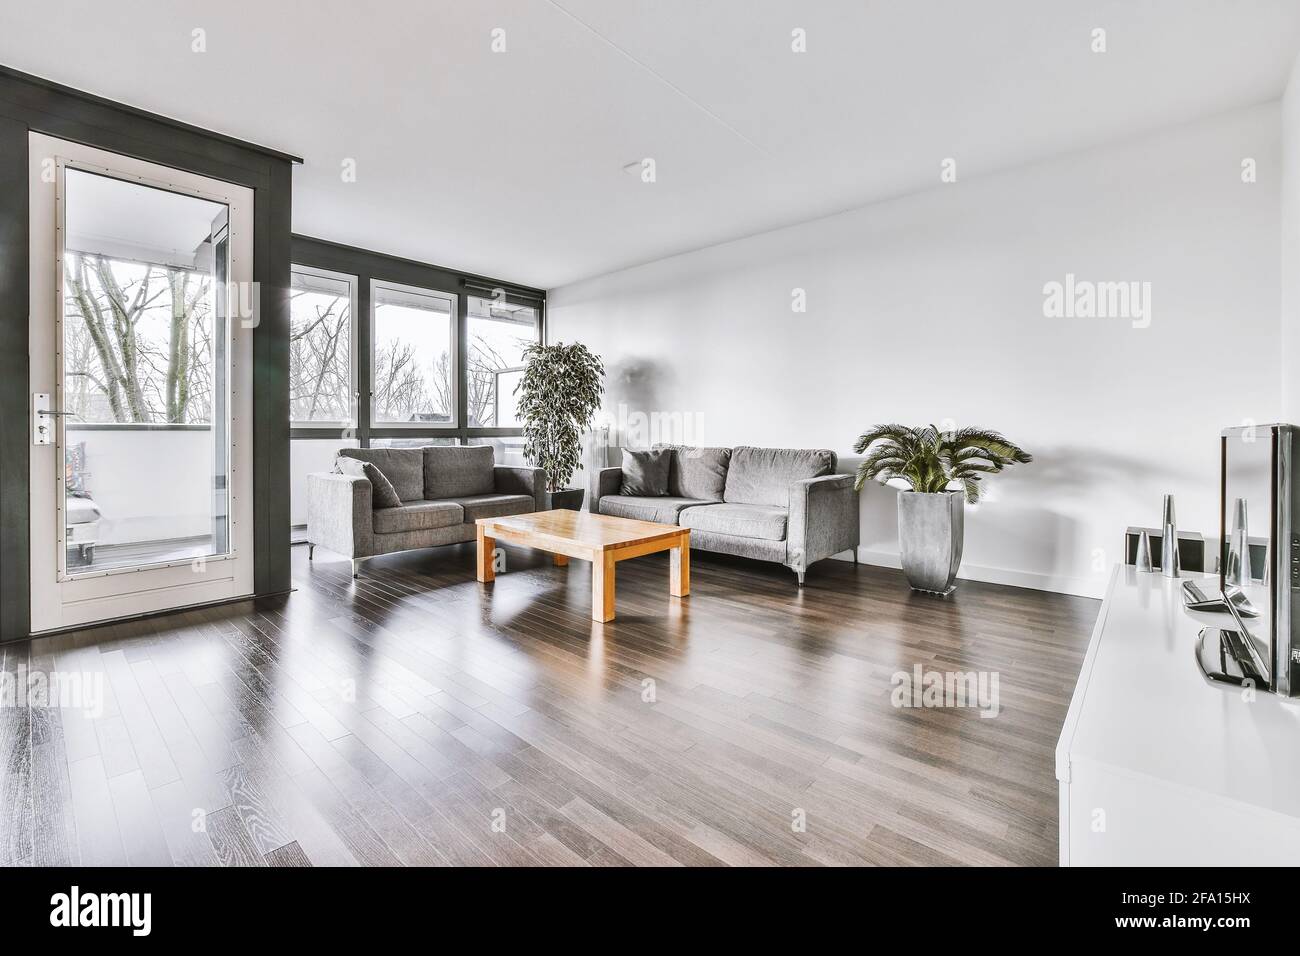 Living room with gray sofas and plants Stock Photo